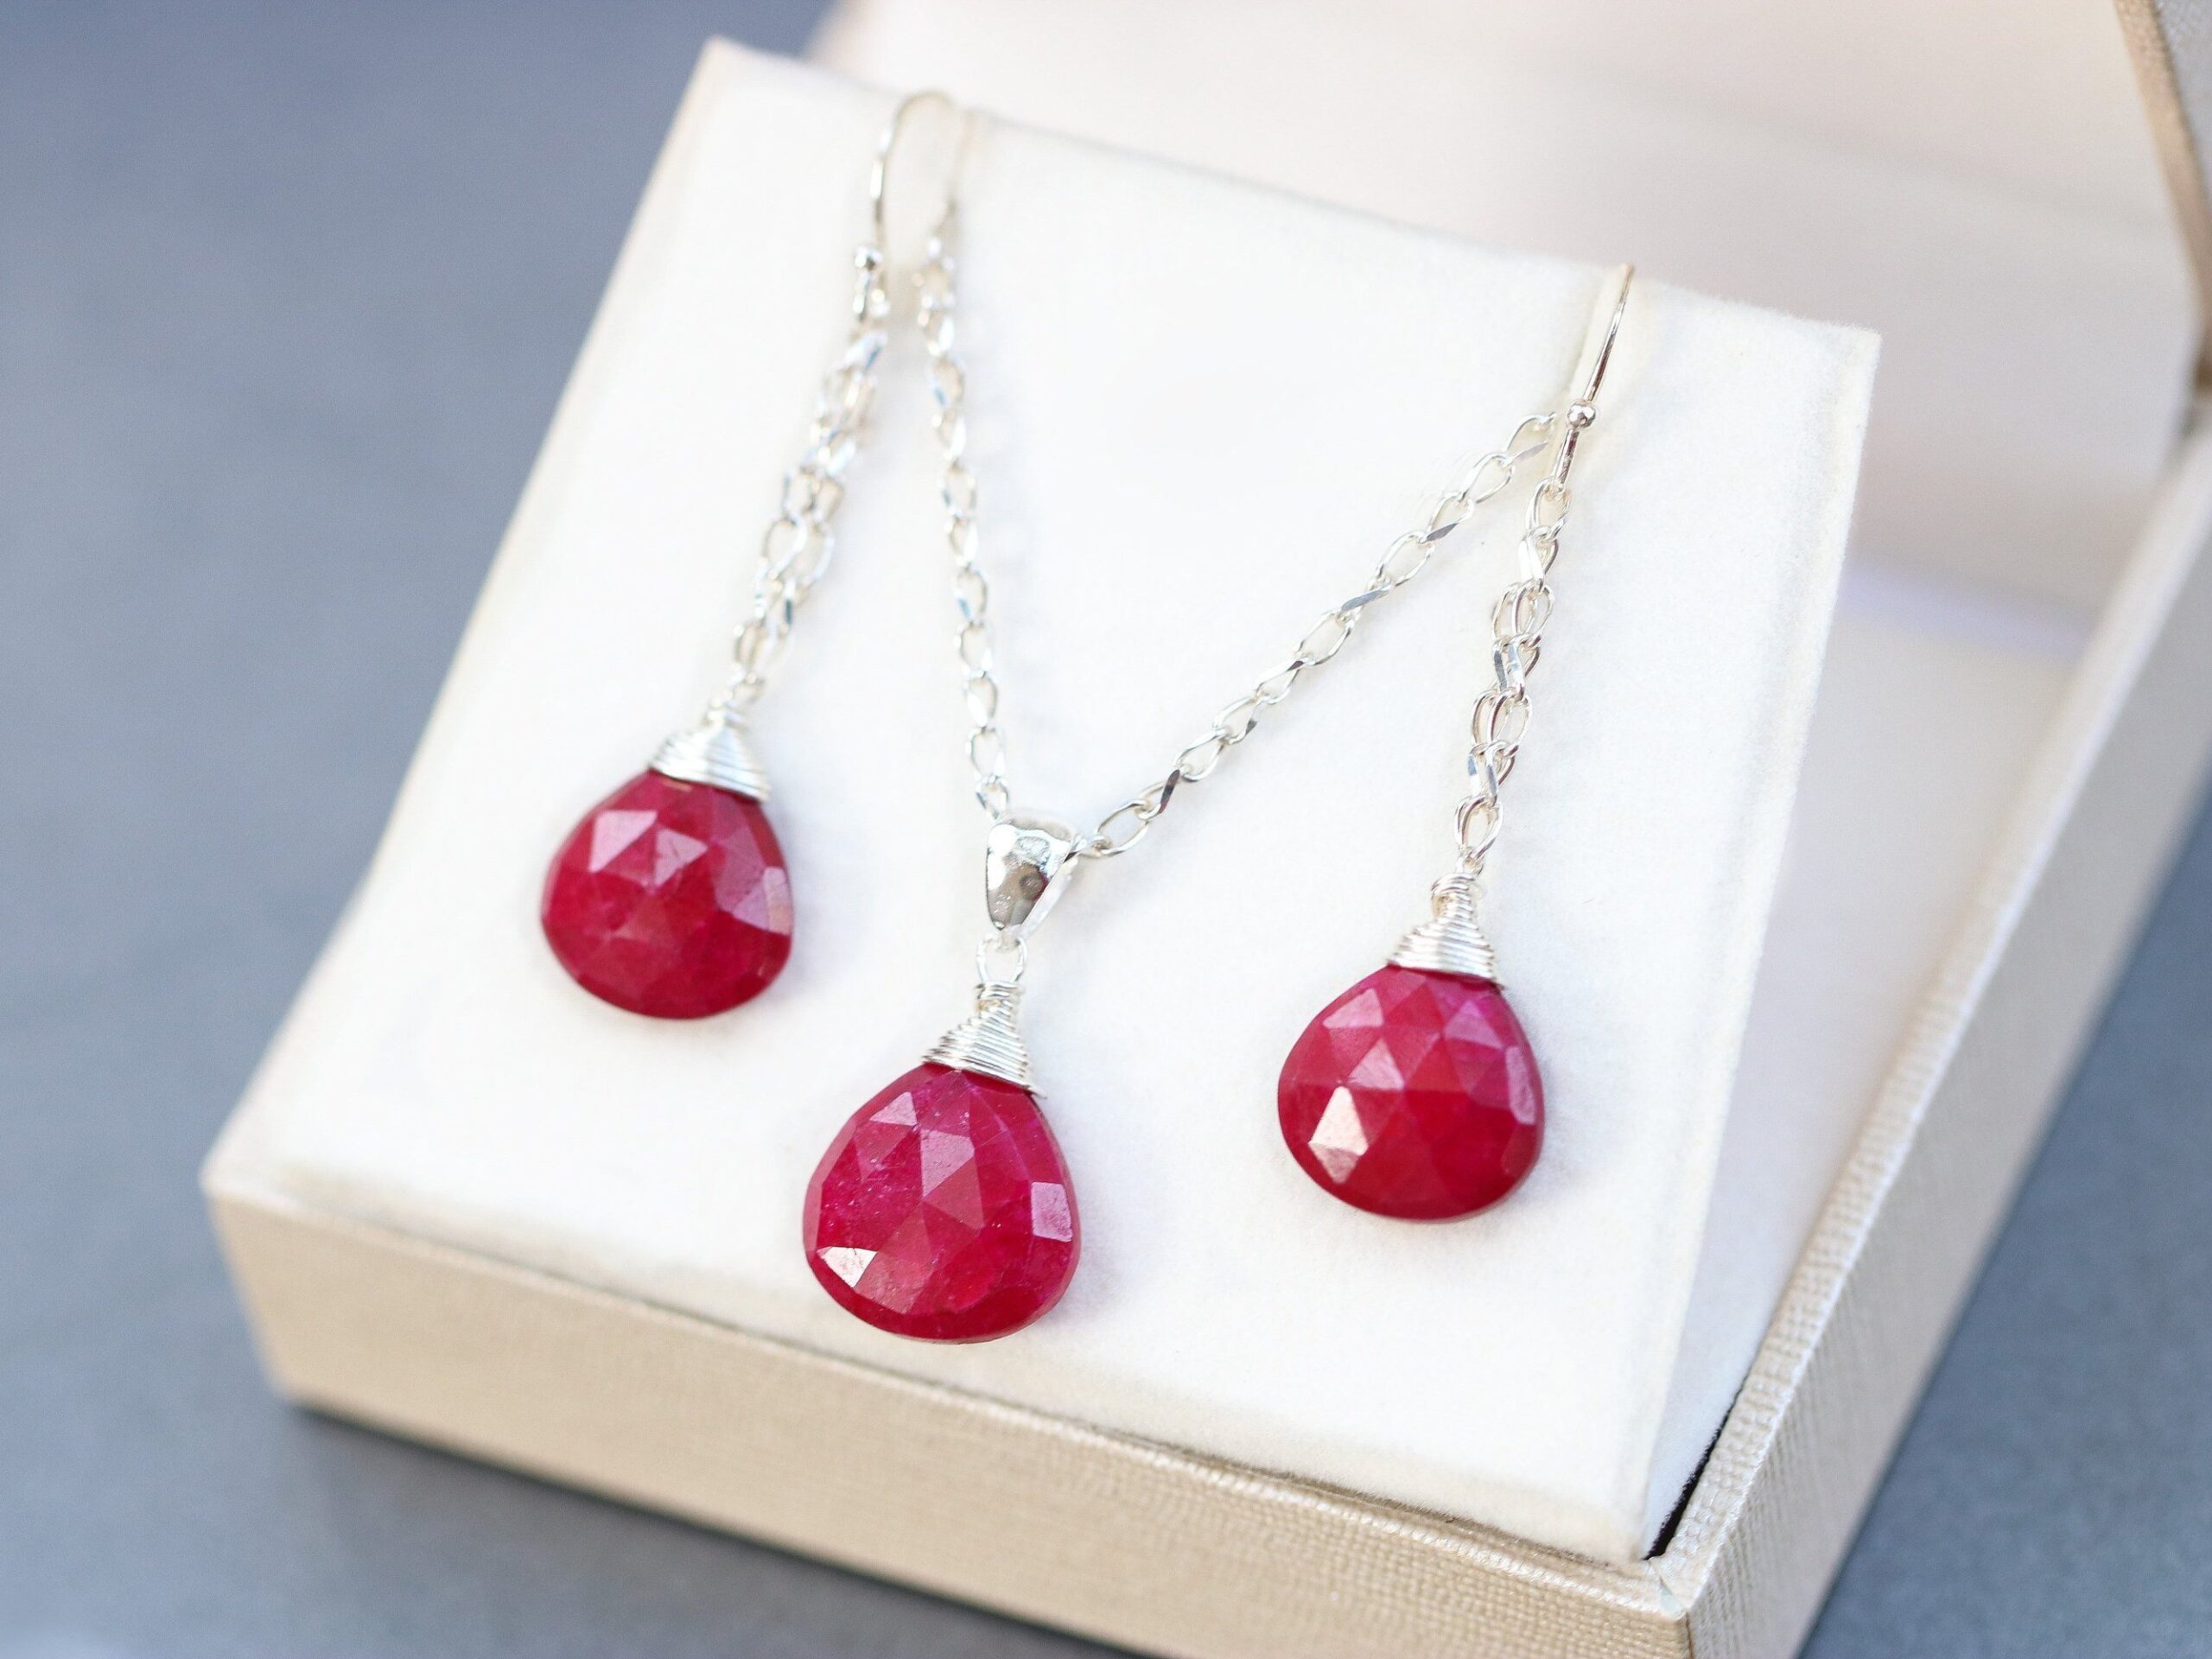 Red-Pink Ruby Pendant and Earrings in Silver, July Birthstone Pendant Jewelry Set